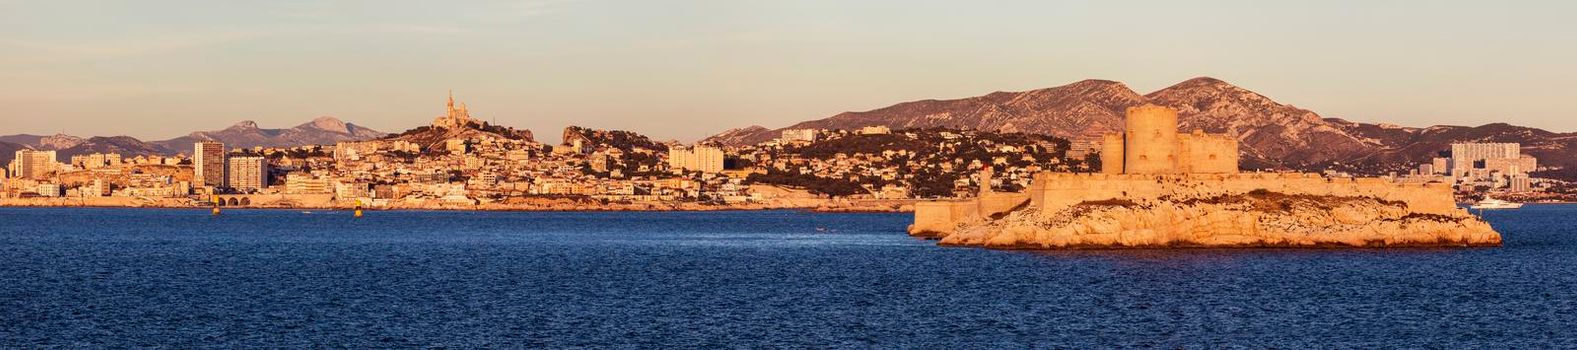 Marseille panorama from Frioul archipelago seen at sunrise. Marseille, Provence-Alpes-Cote d'Azur, France.